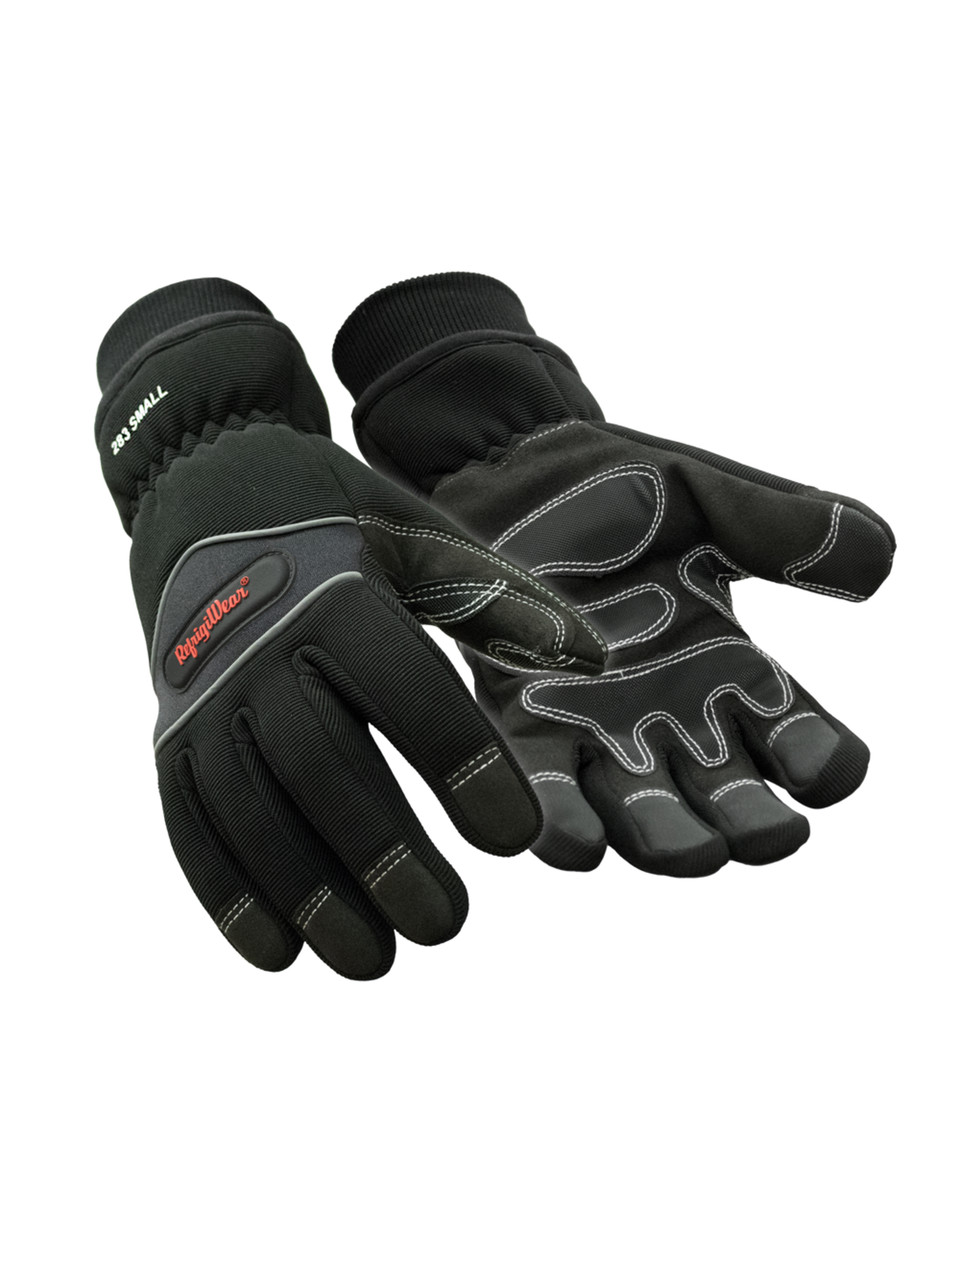 Waterproof Abrasion Safety Glove (283), Rated for -20°F